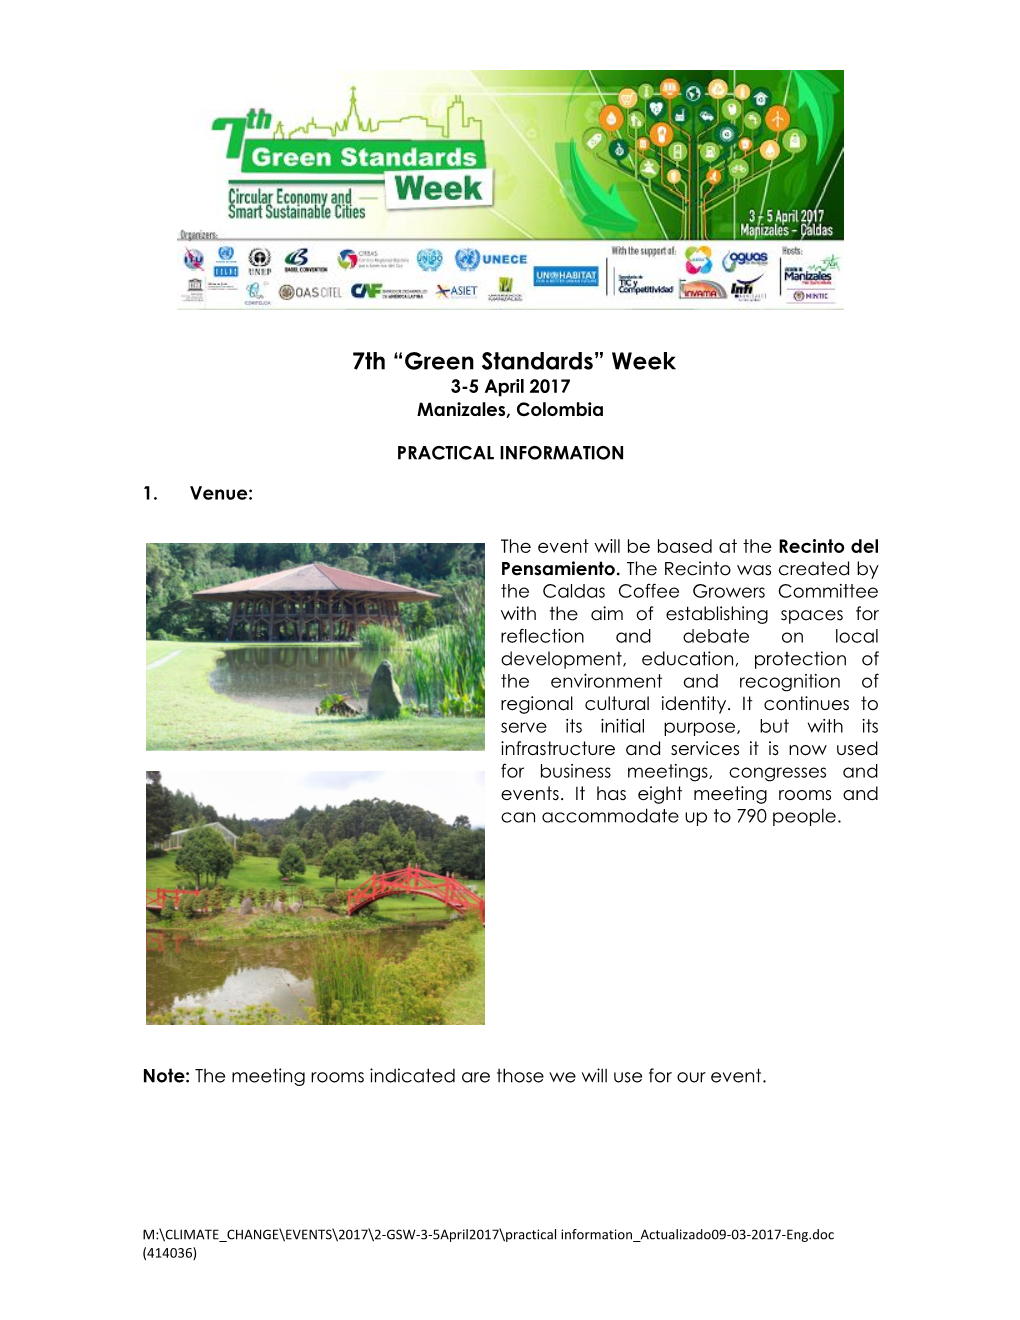 7Th “Green Standards” Week 3-5 April 2017 Manizales, Colombia